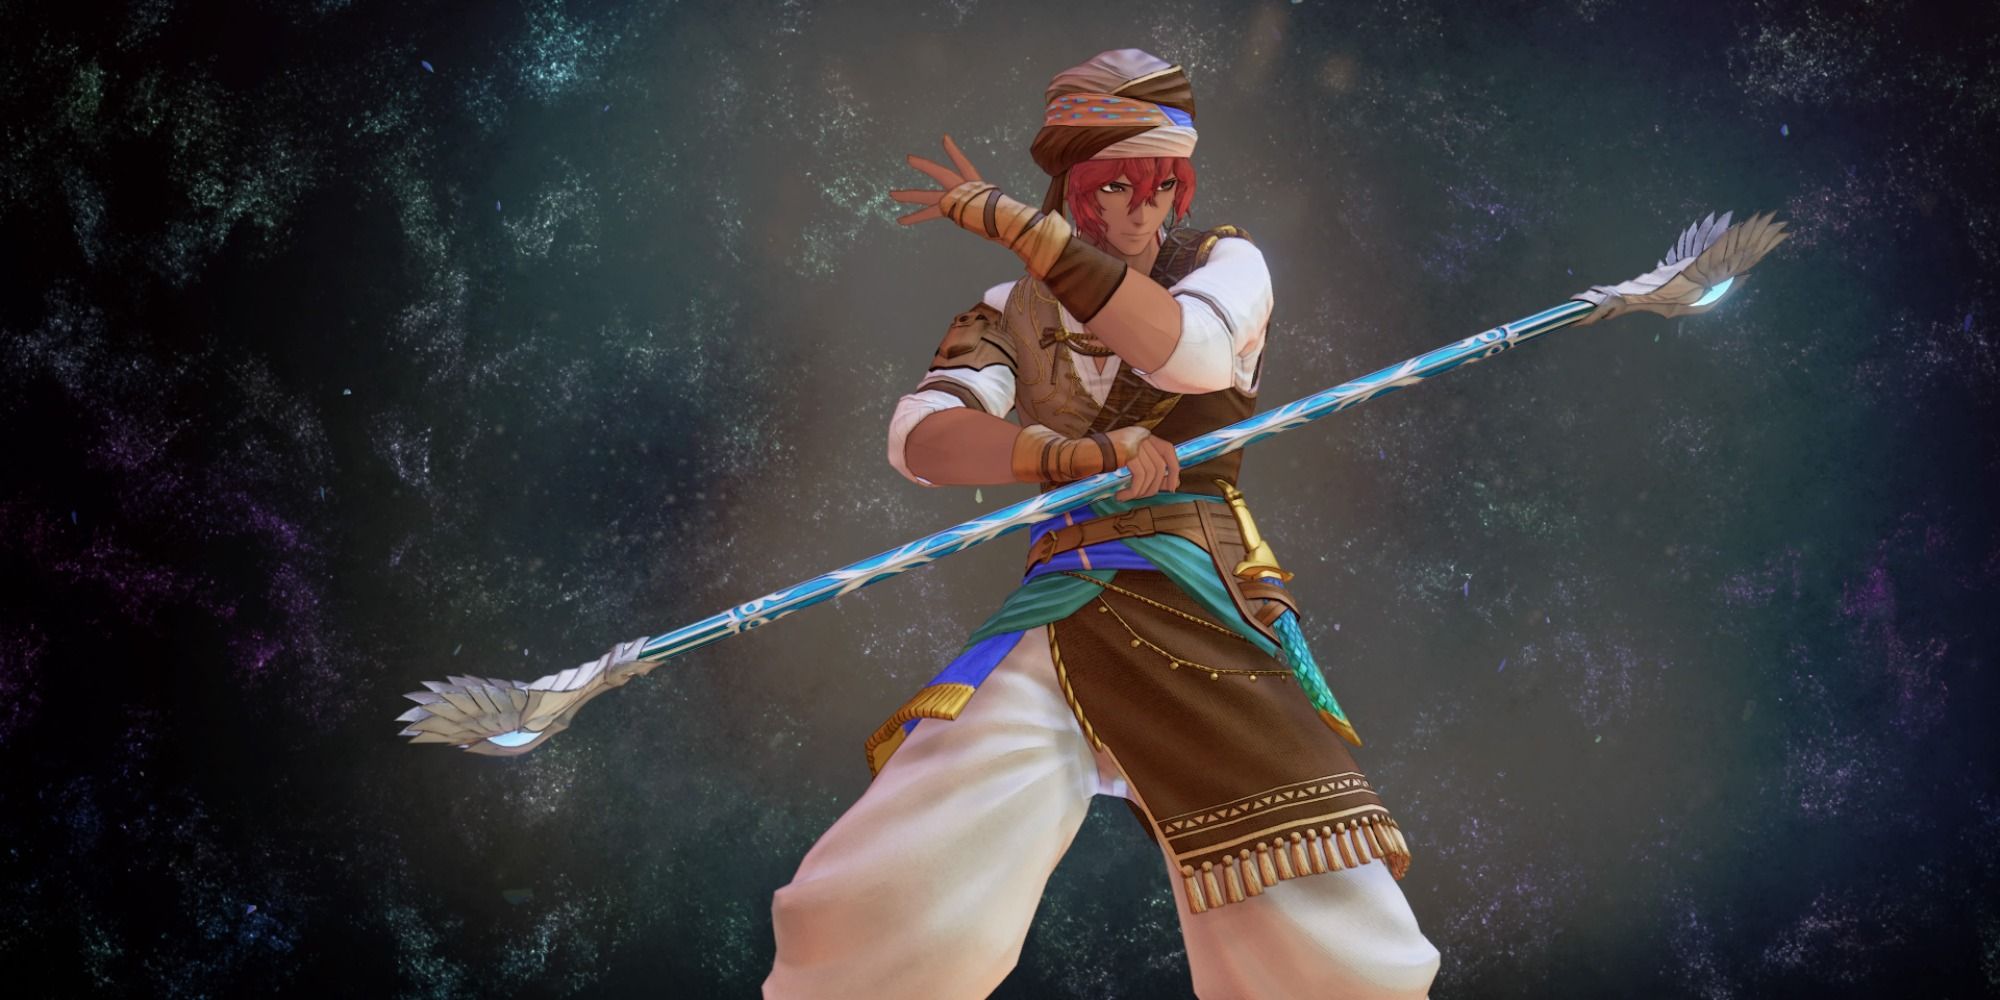 Dohalim in Tales of Arise wielding the Liber Pater rod